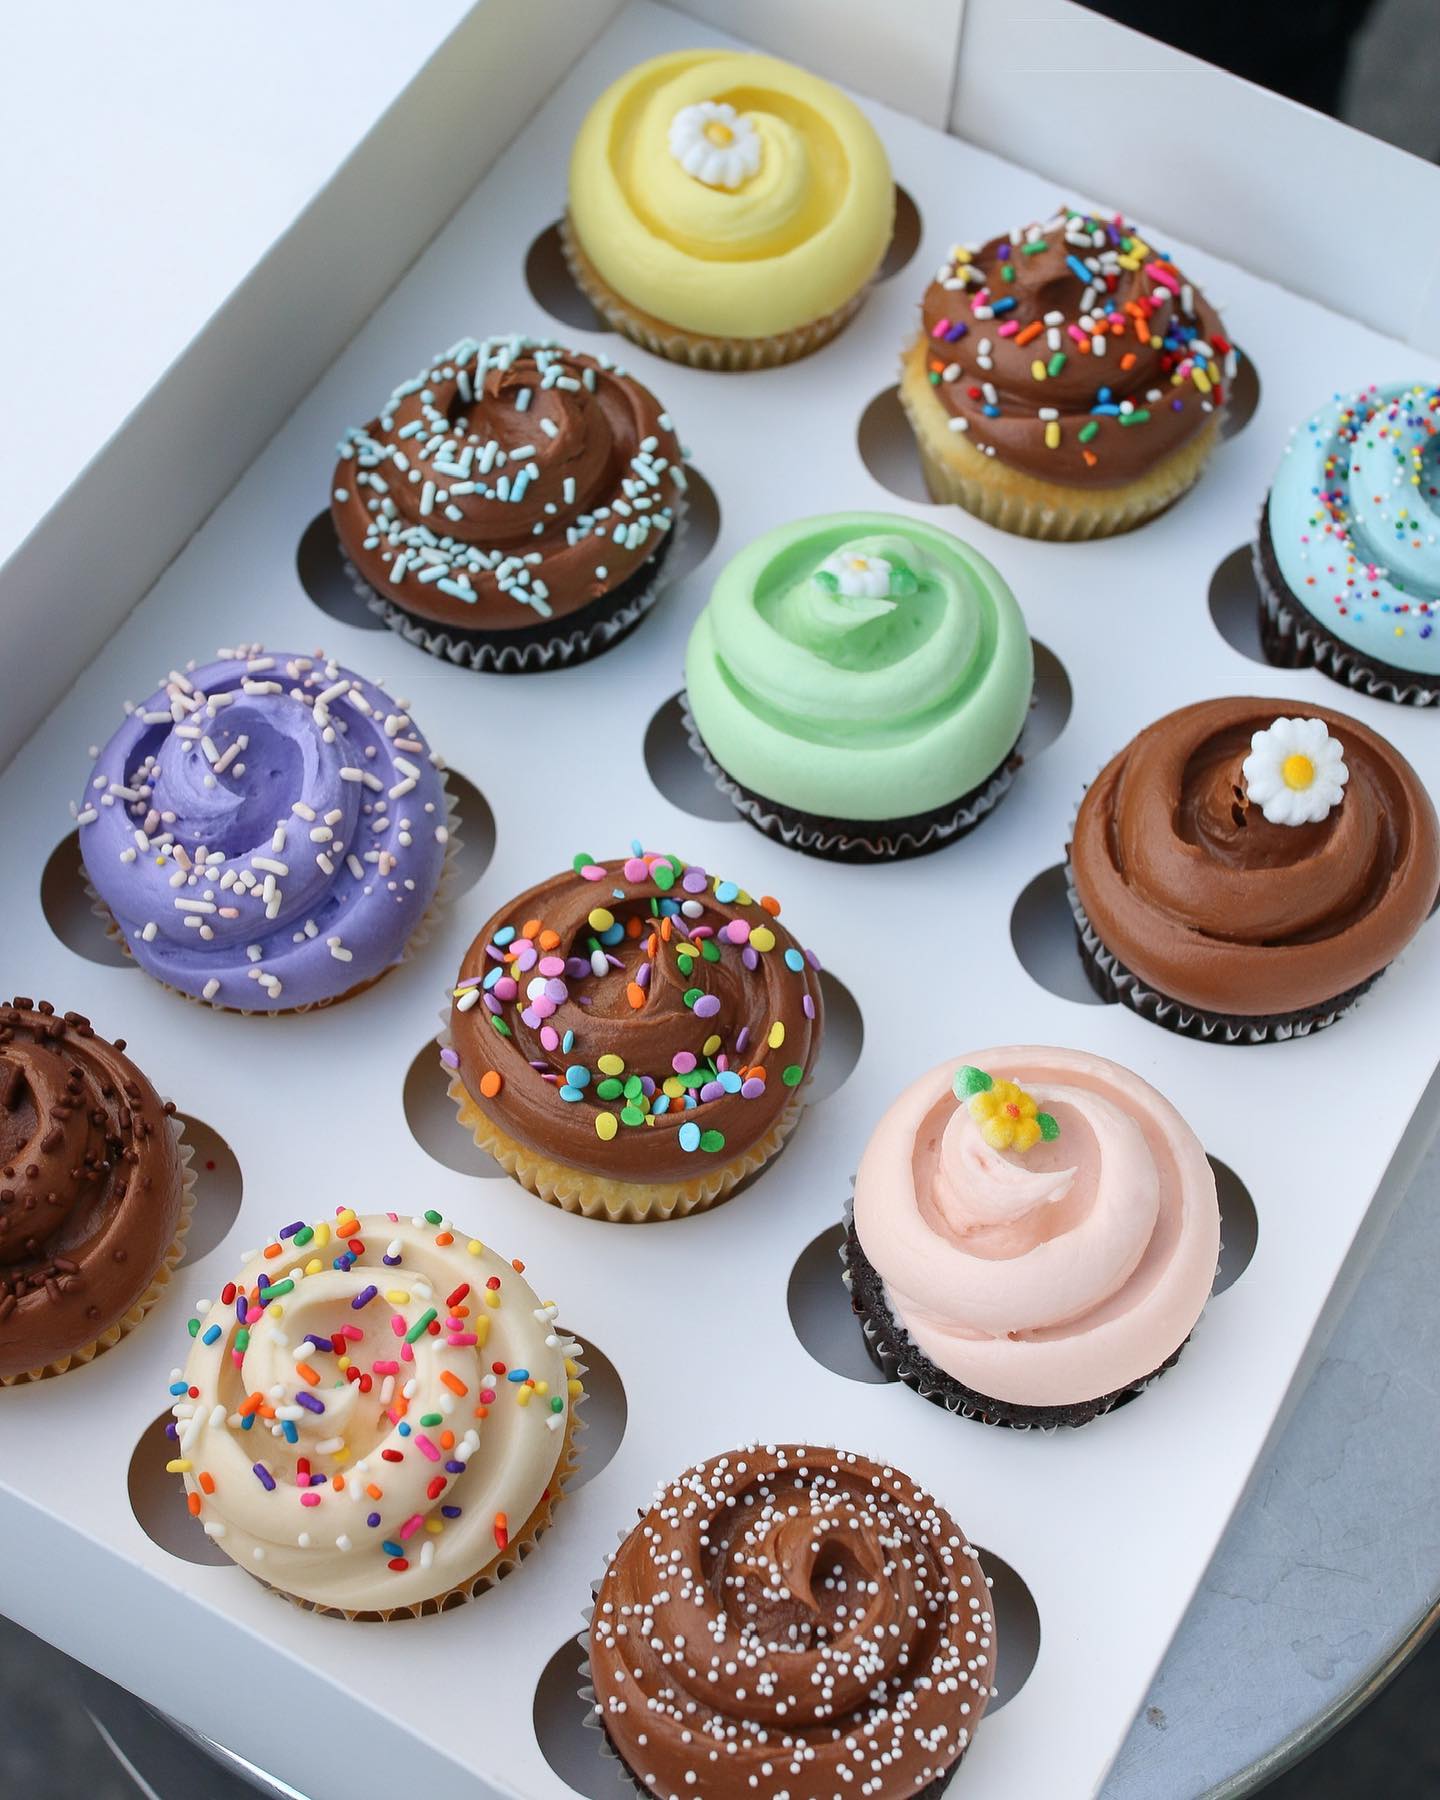 Sex And The City Cupcakes Are Here As Magnolia Bakery Comes To India